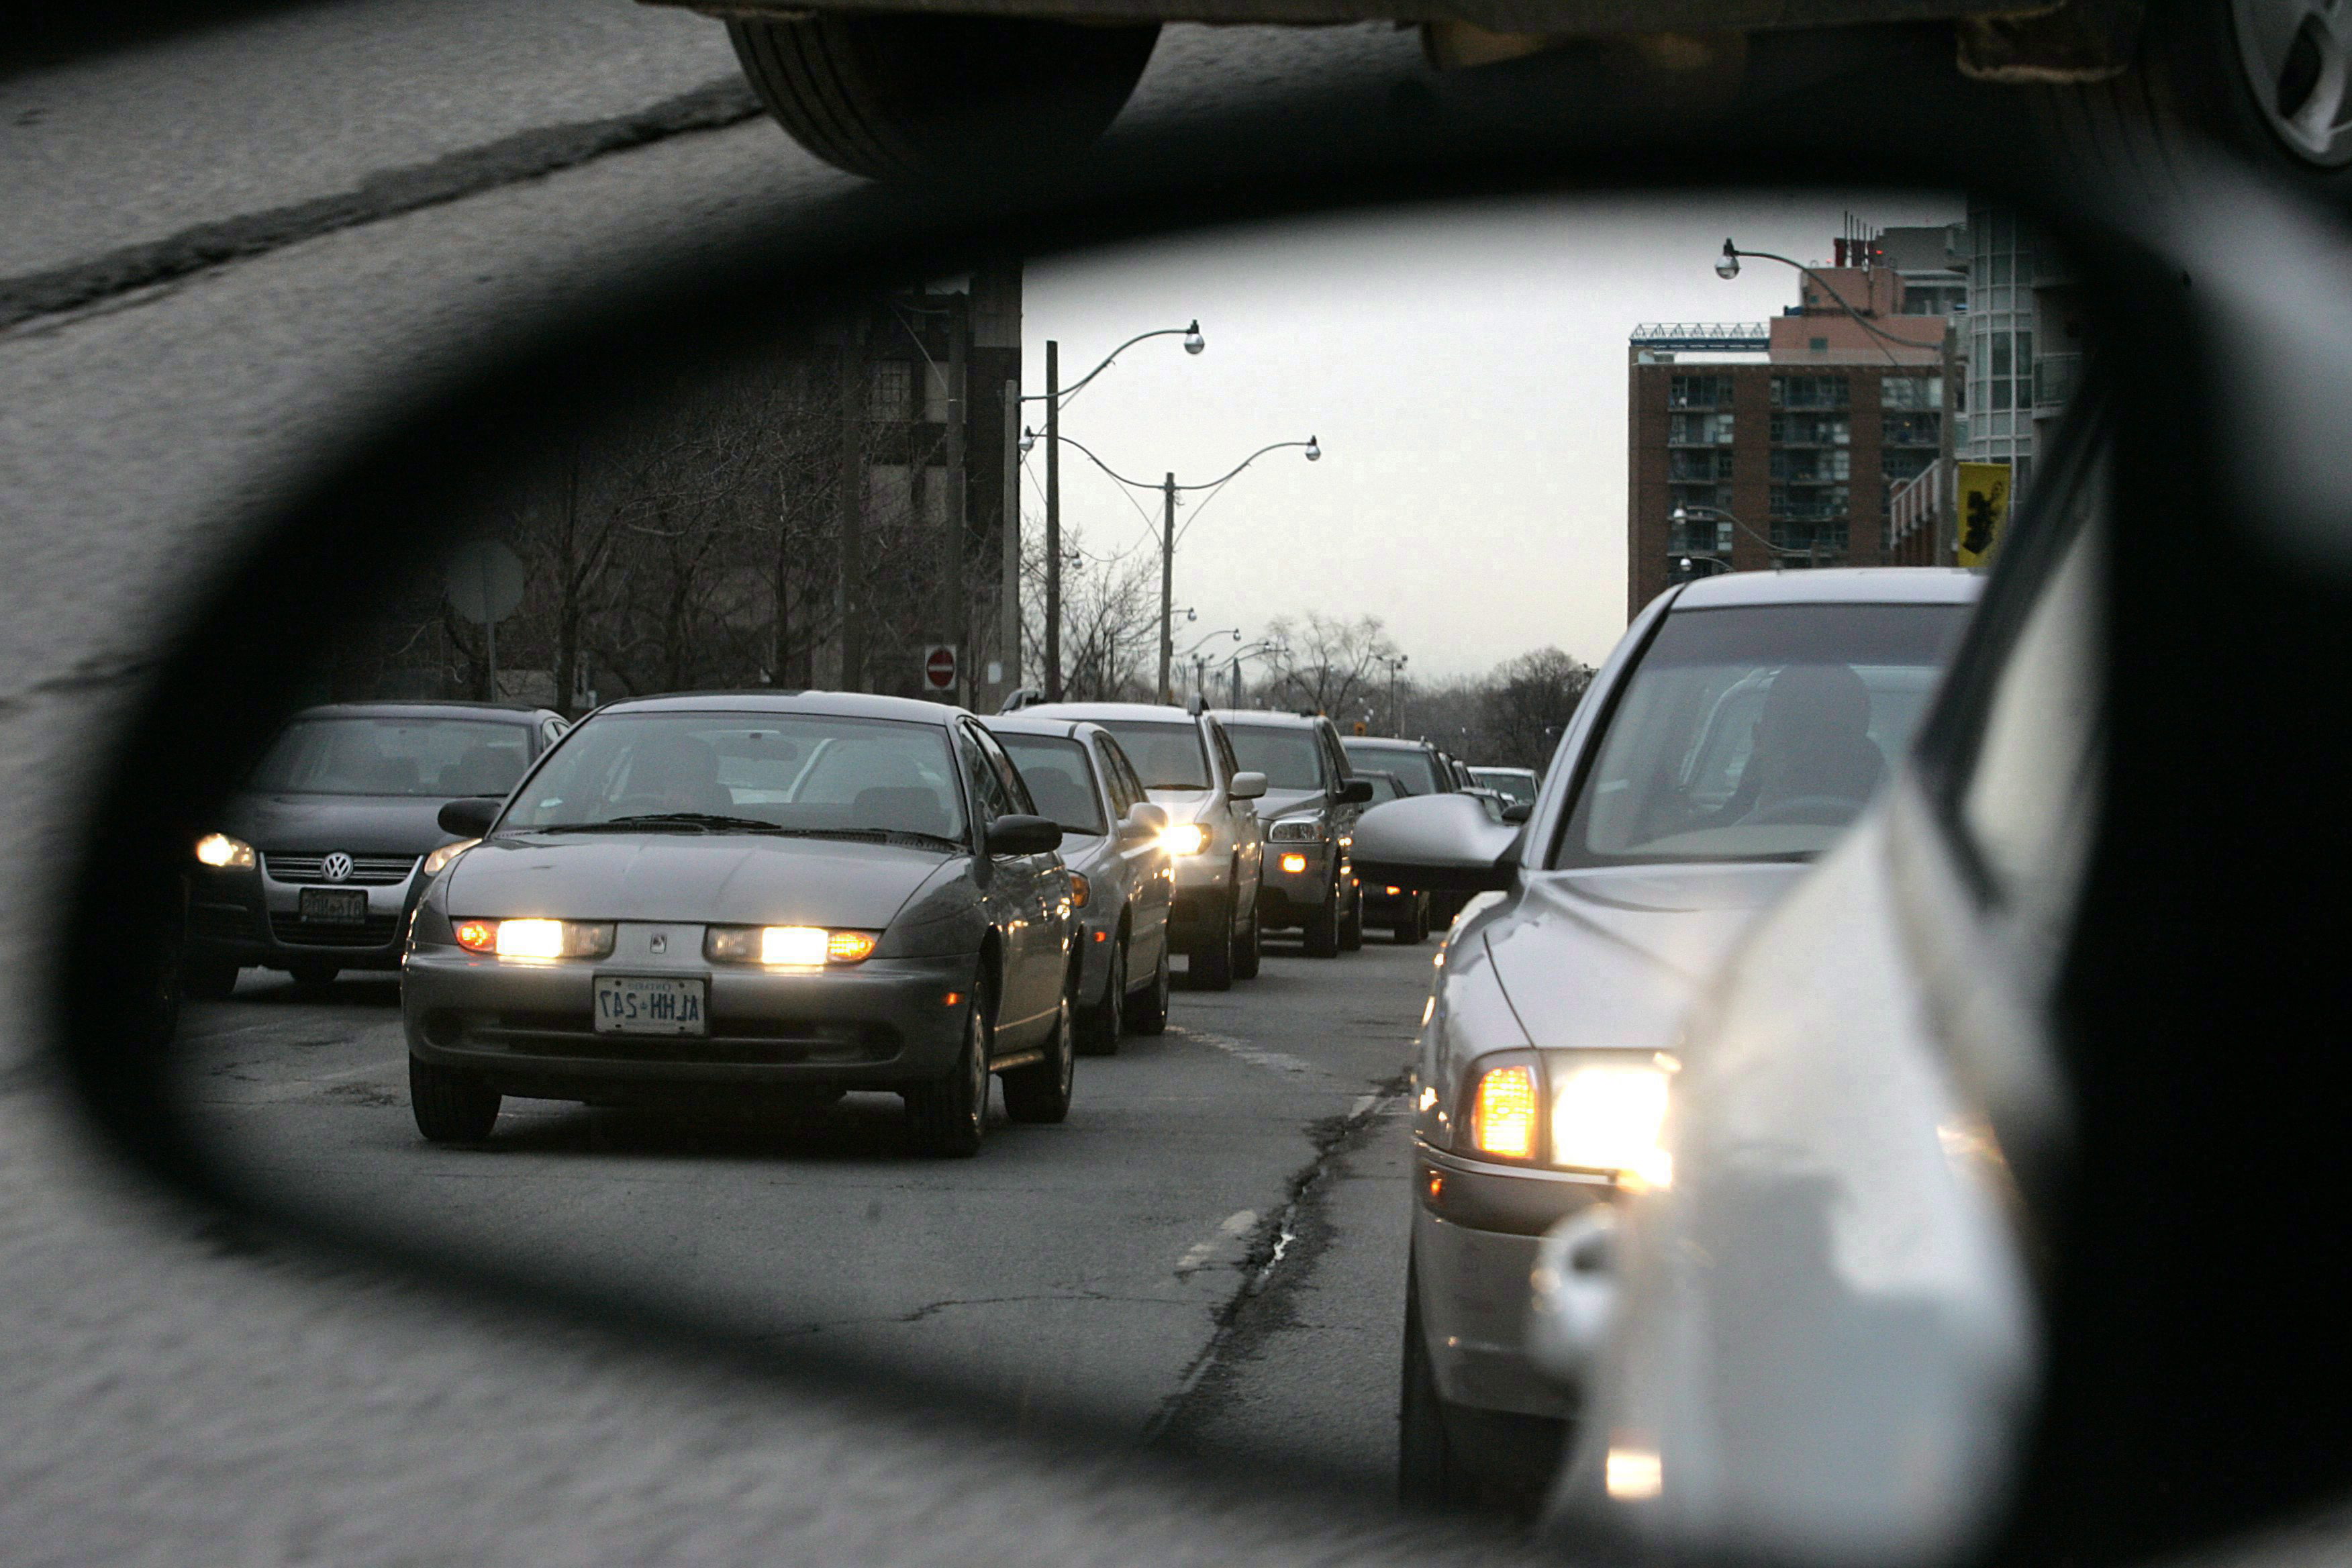 New auto insurance rules could let Ontario drivers opt for less. But by how much?